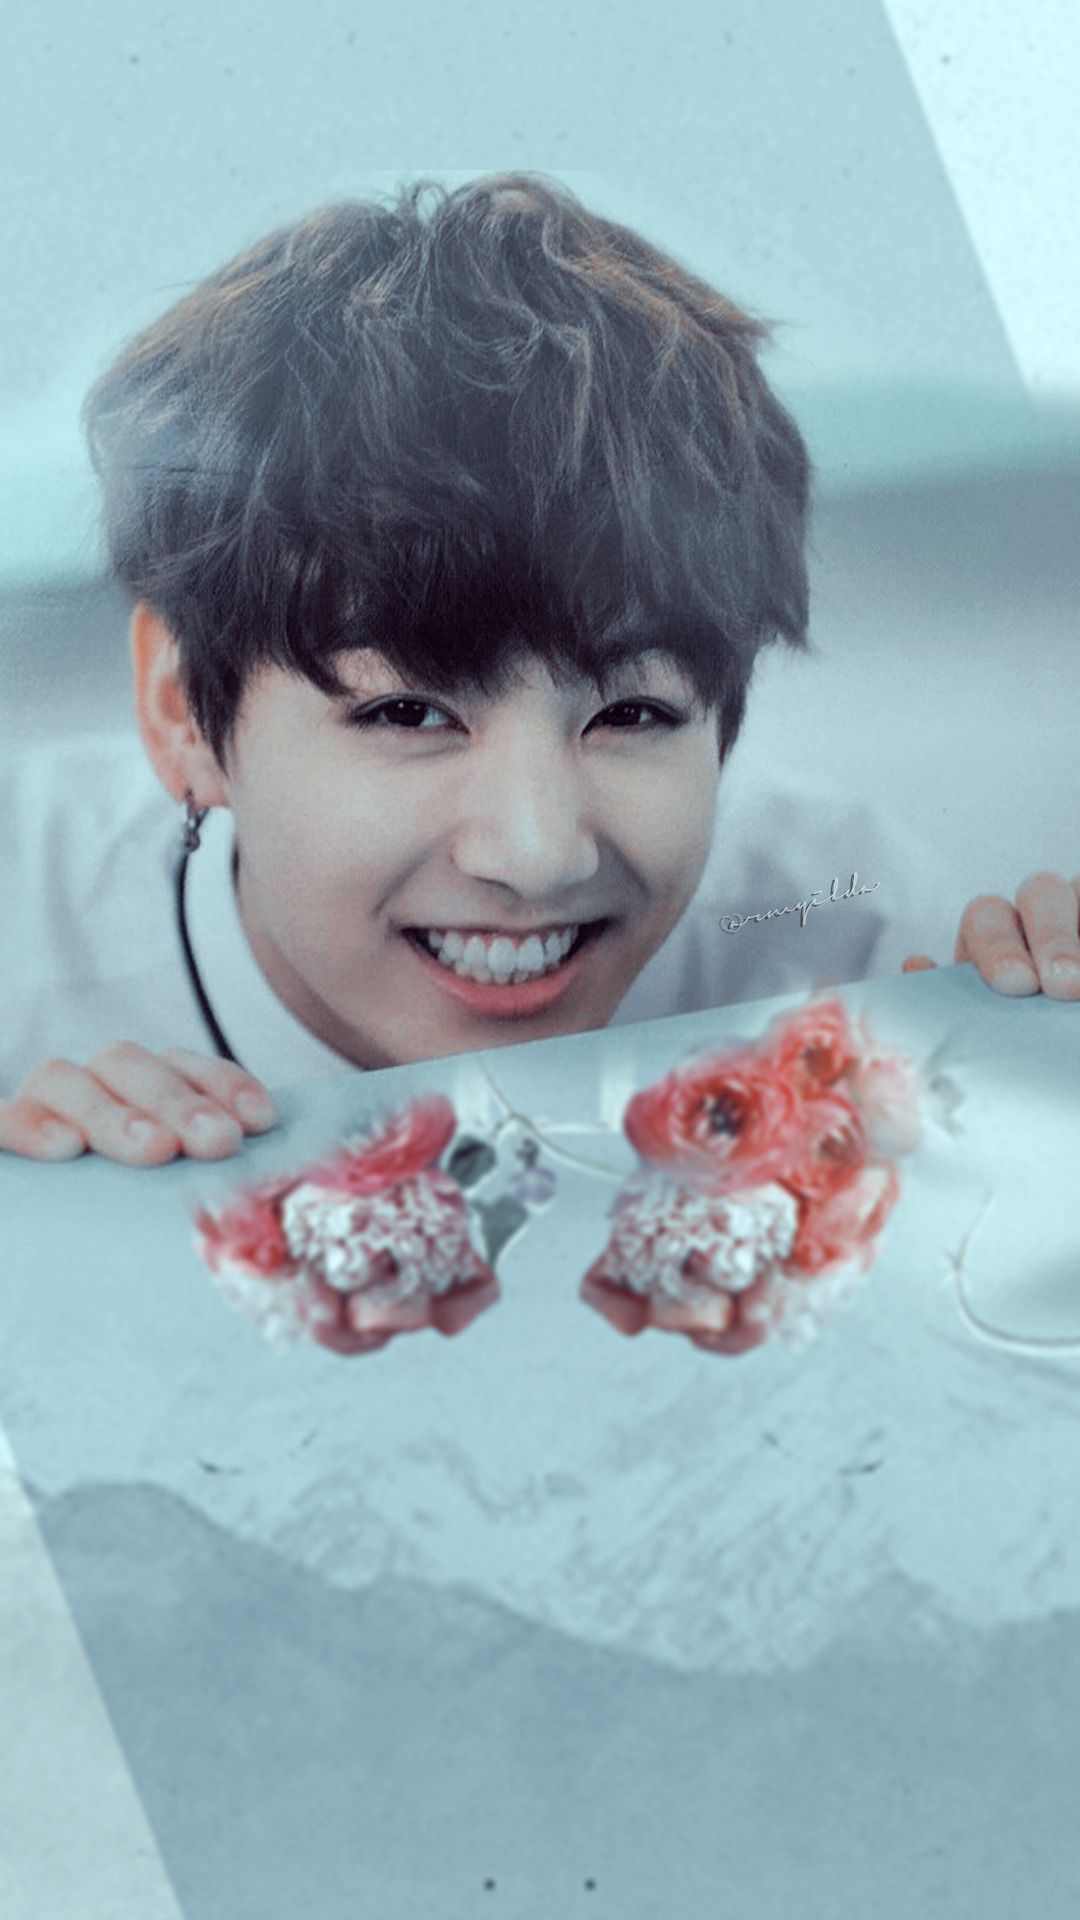 BTS Jungkook FREE Pictures on GreePX